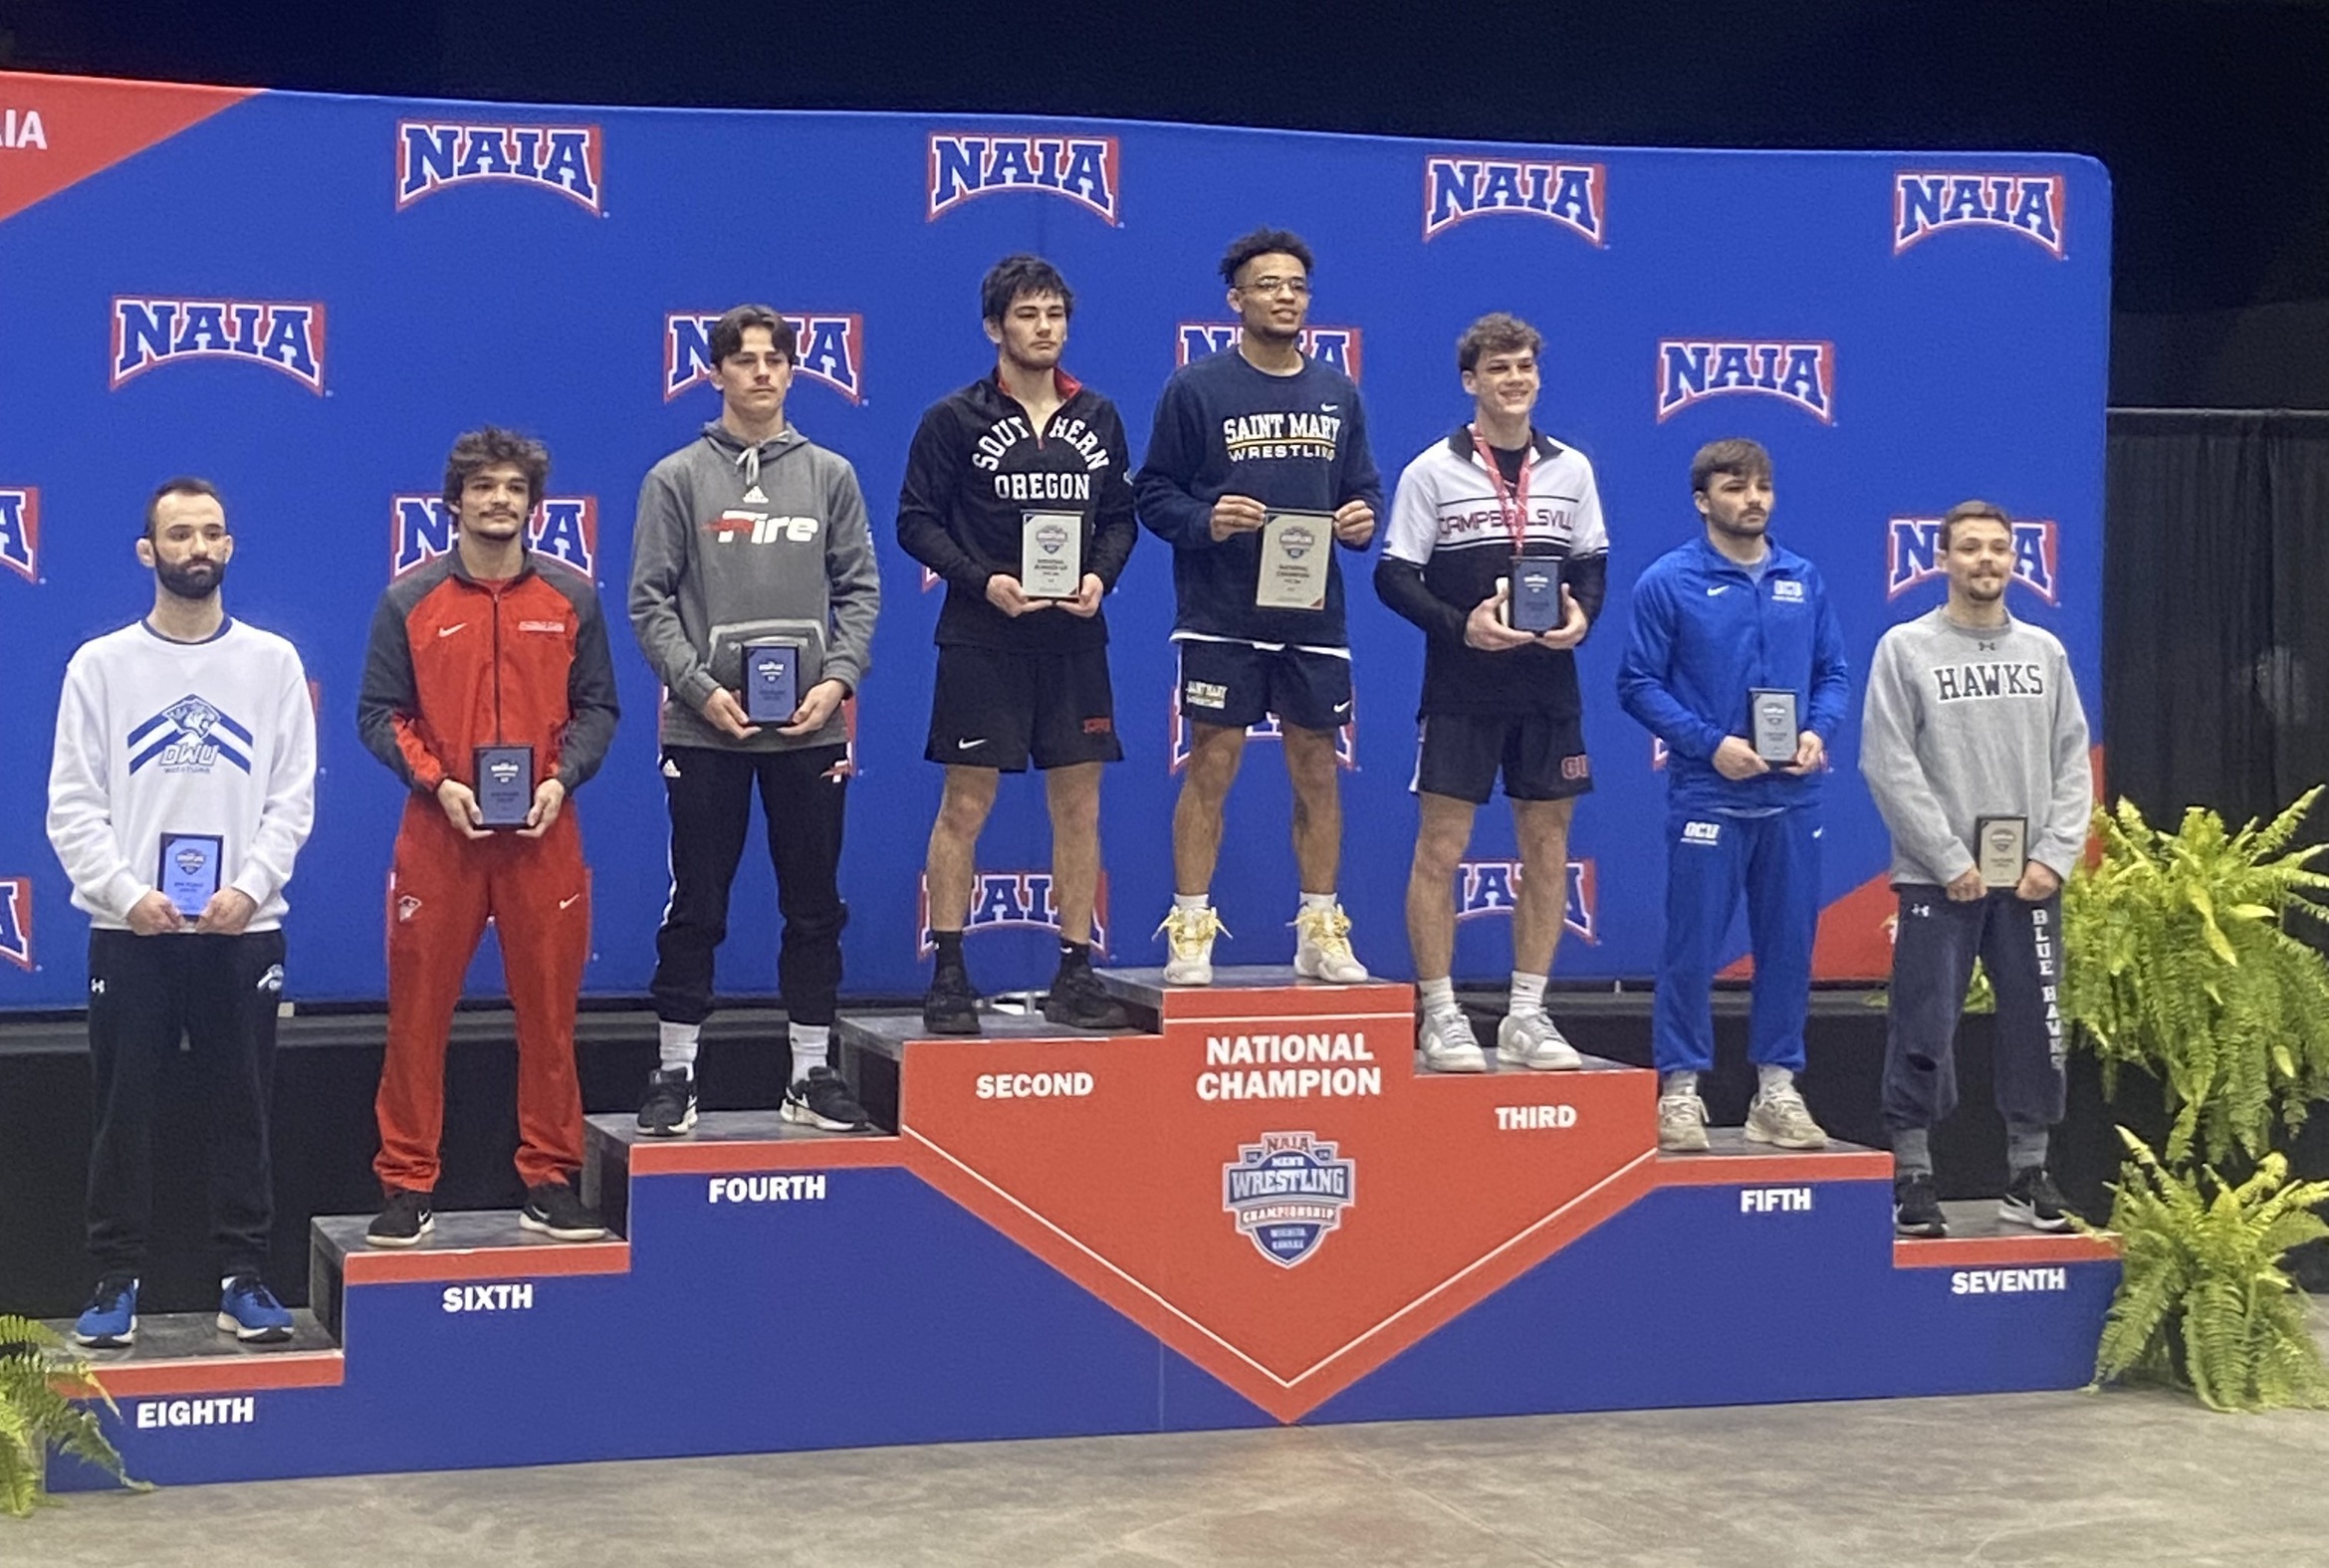 Nortje finishes seventh to lead Blue Hawk wrestling at NAIA nationals